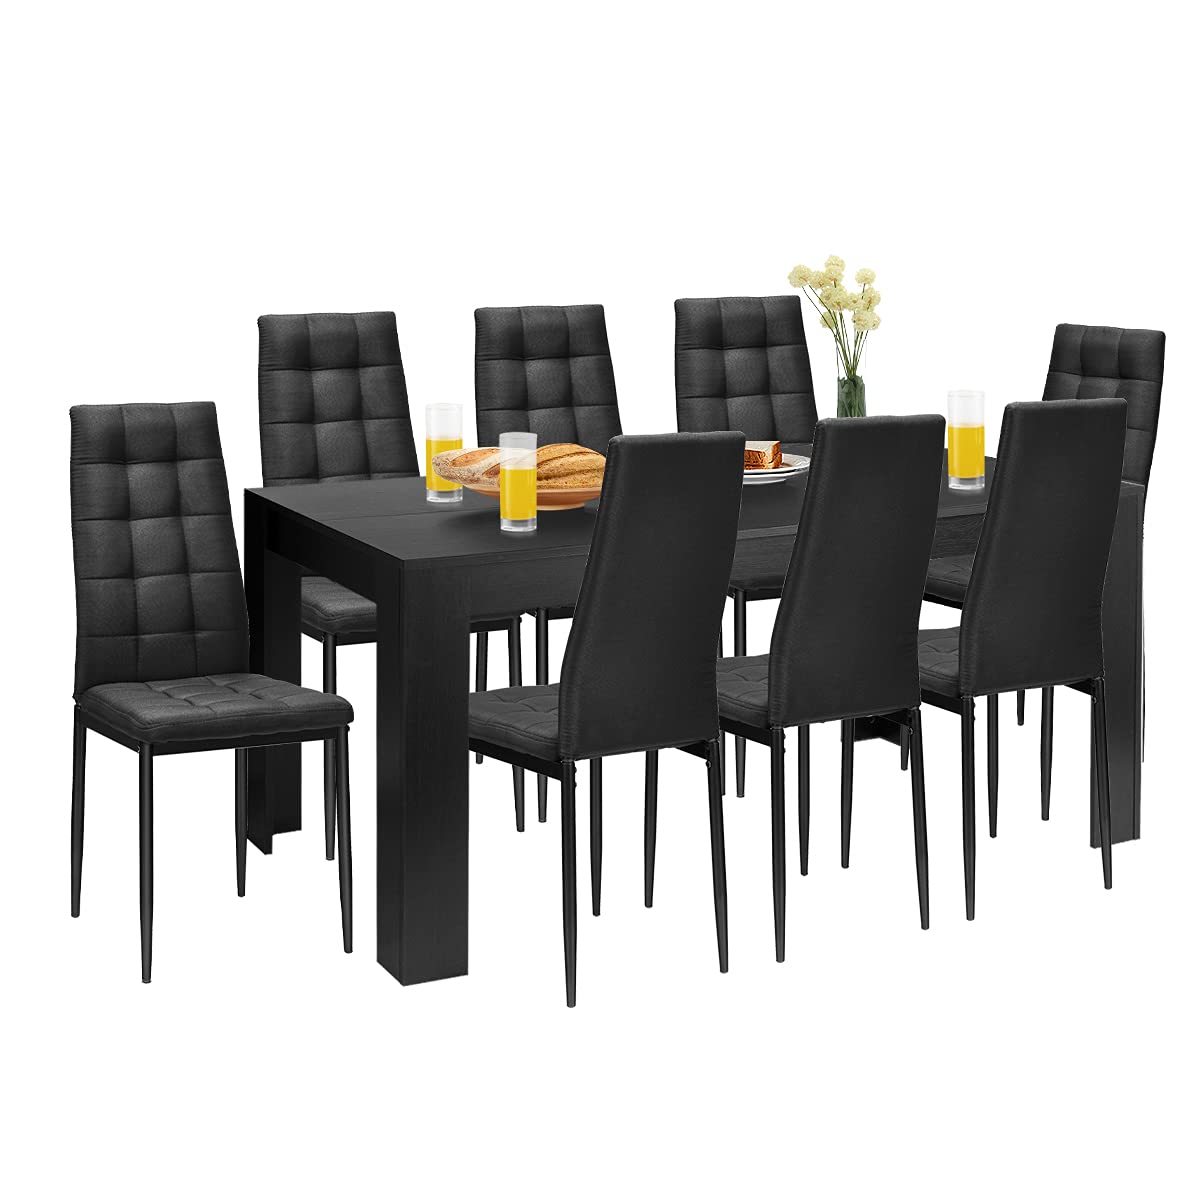 Giantex 9 Pcs Dining Table Set, Wood Rectangular Table with 8 Upholstered Chairs Set